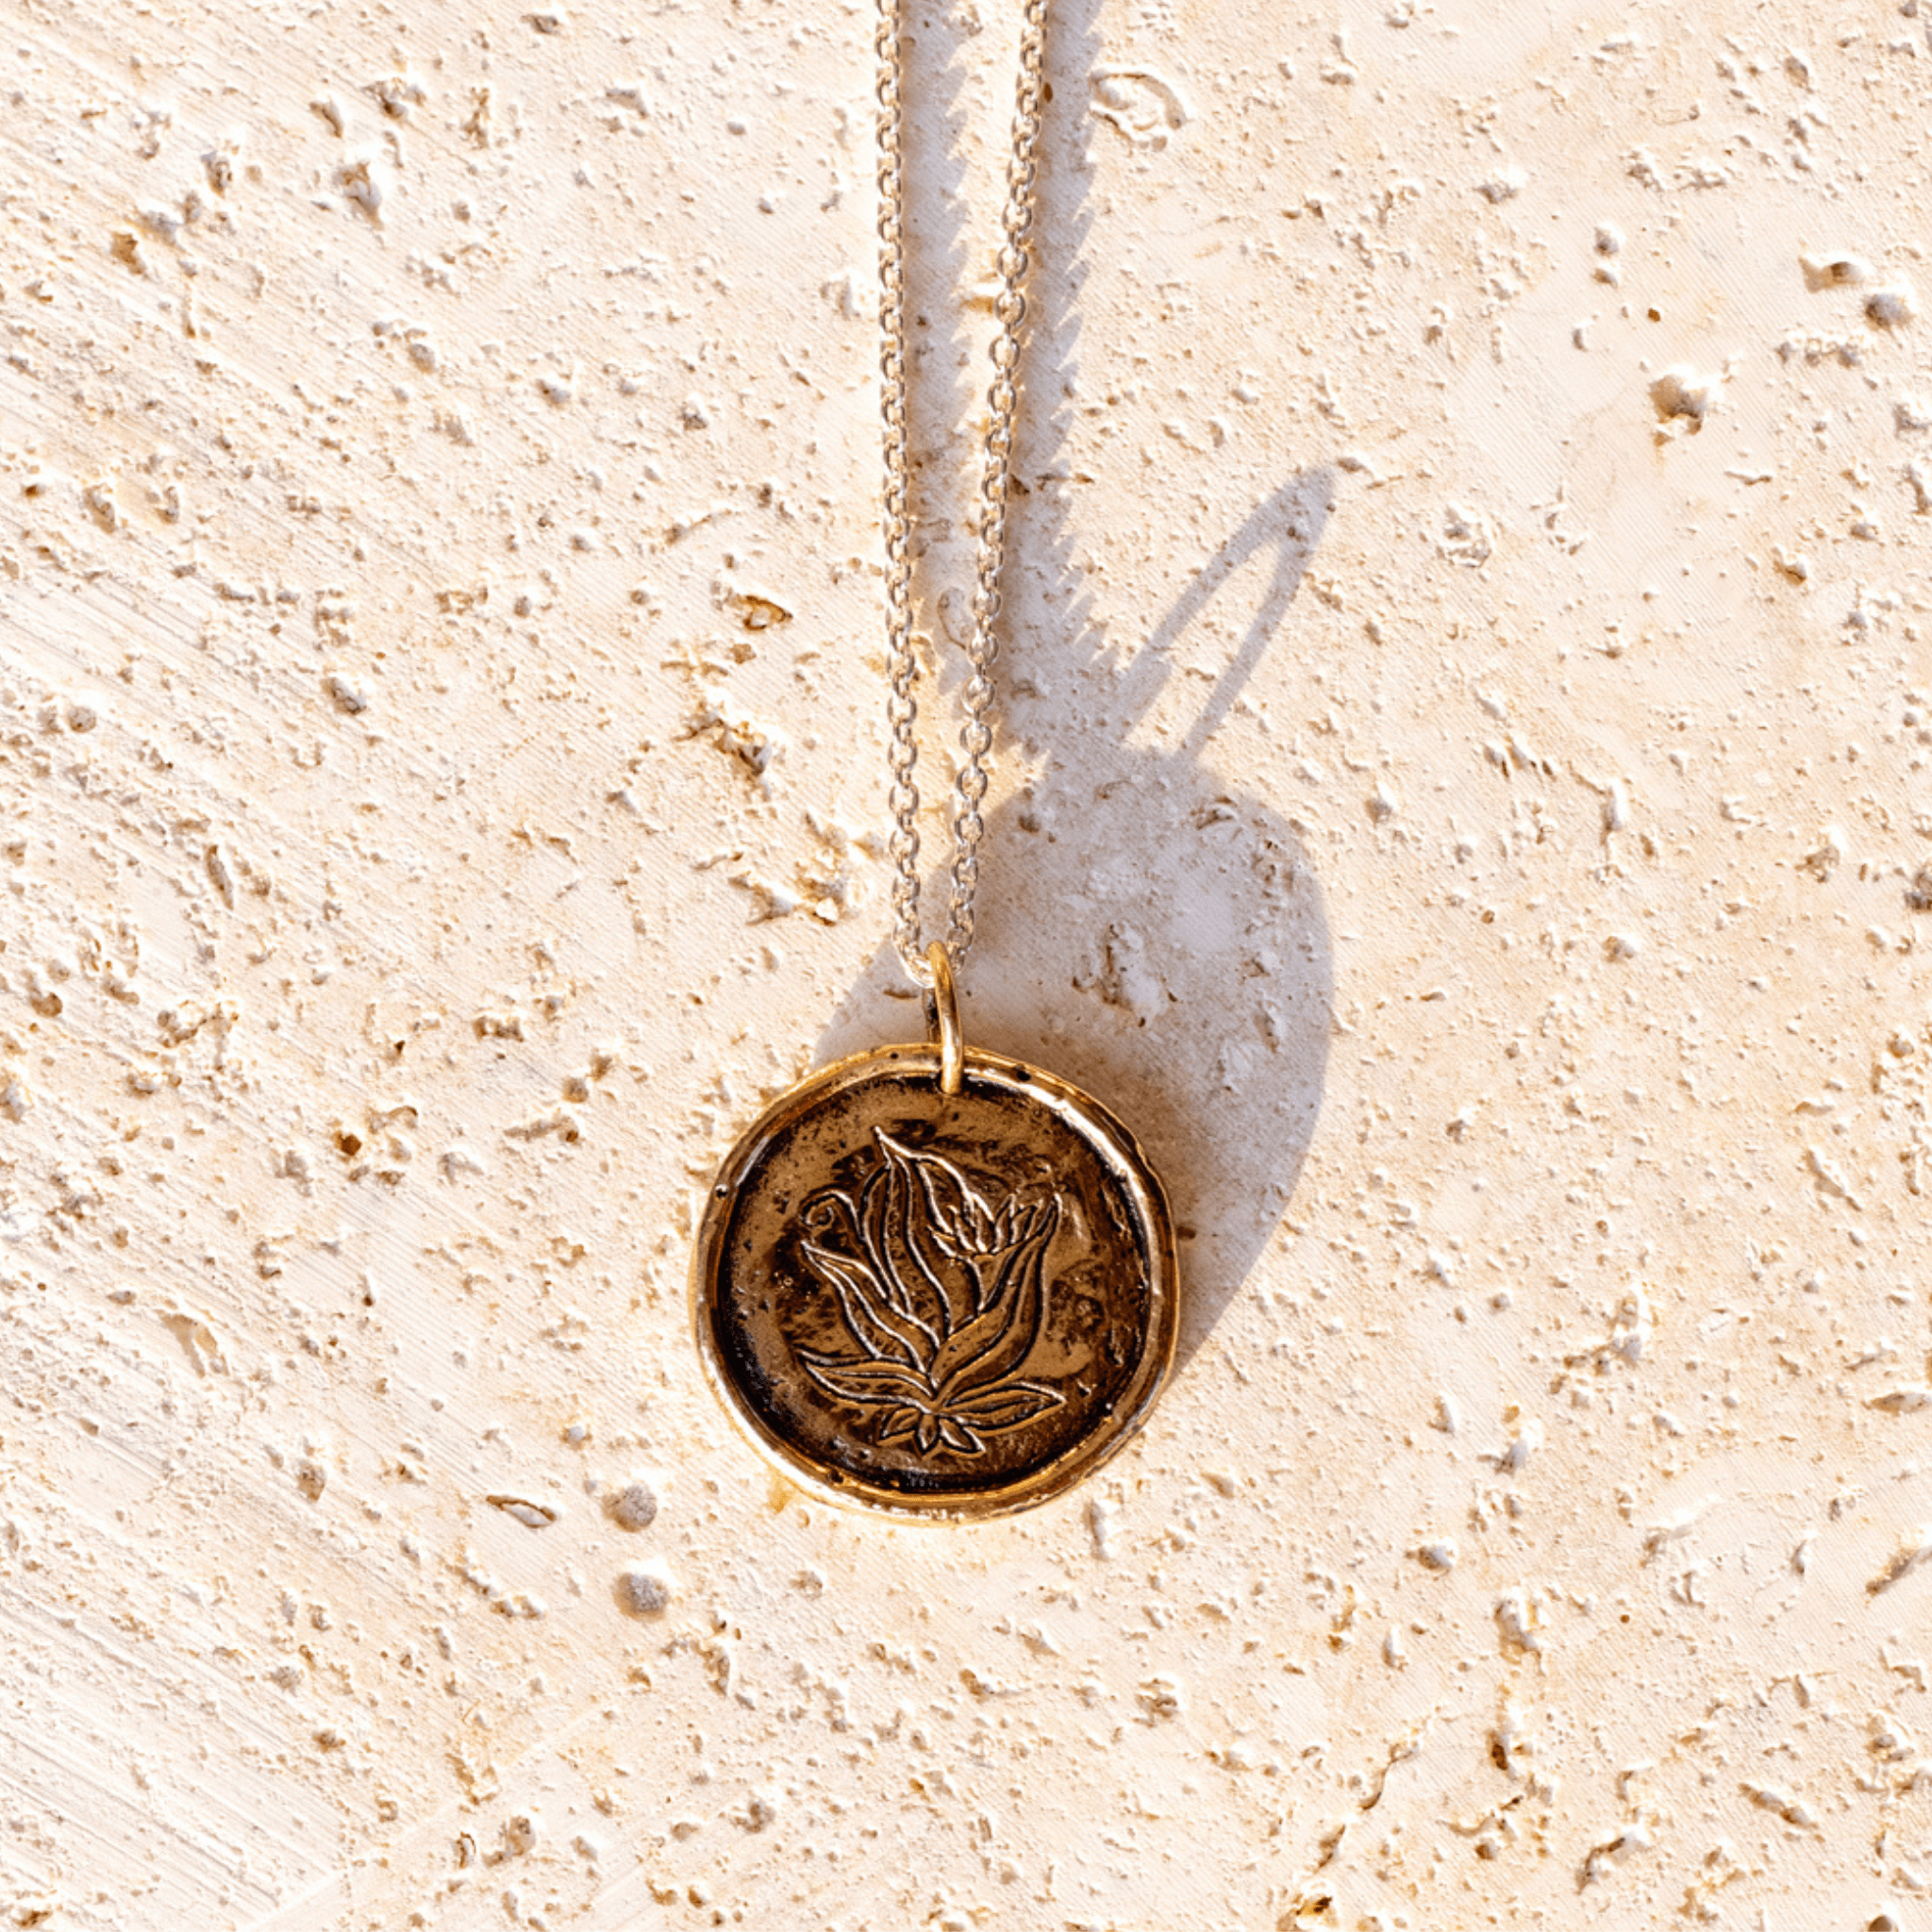 Jewelry Evolution Necklace The Four Agreements Medallion Necklace